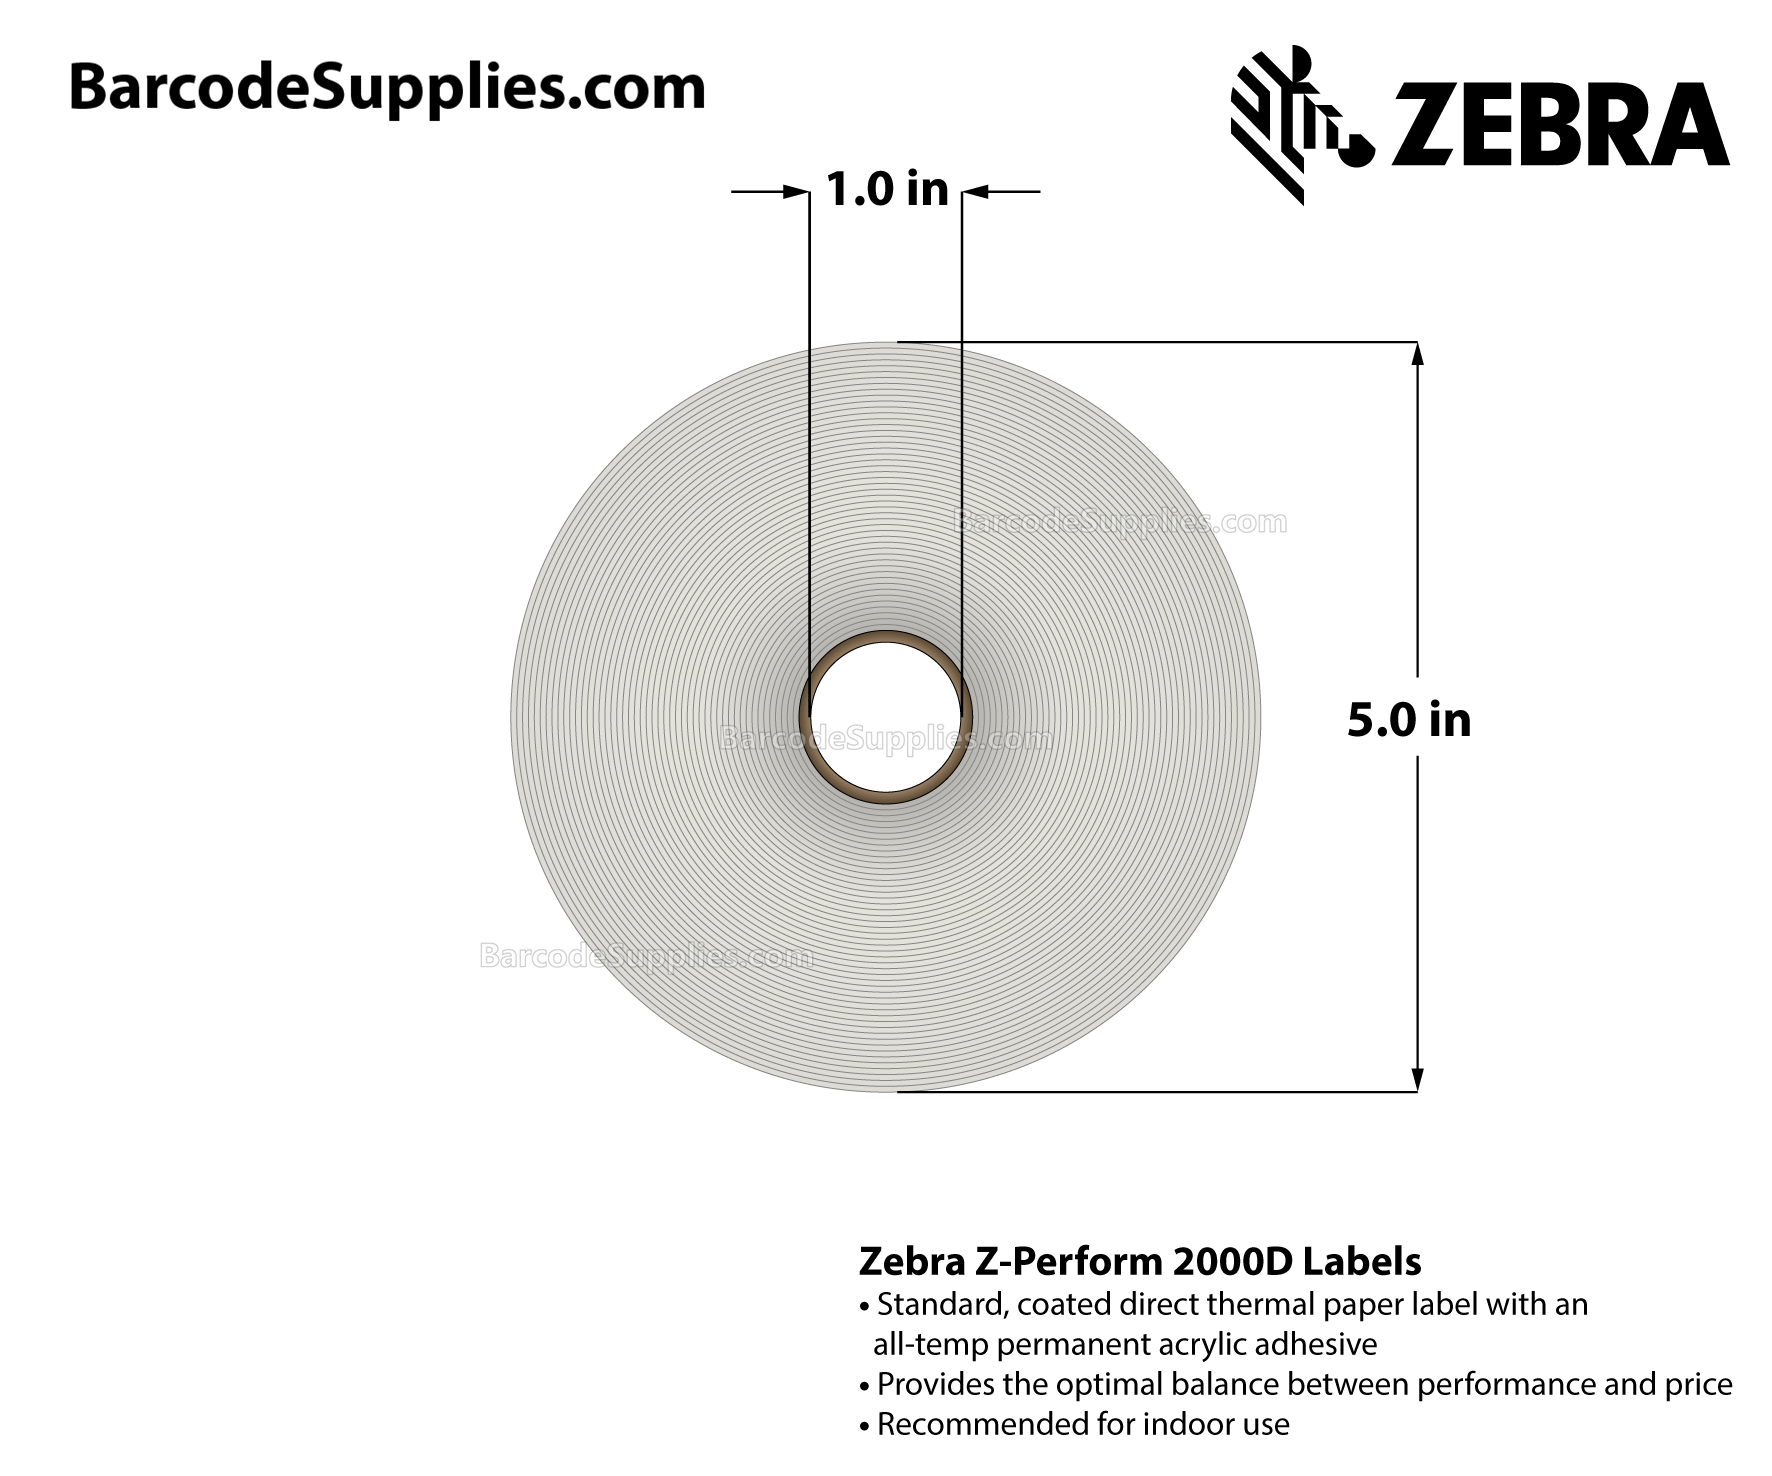 Zebra 4.00 x 6.00 Direct Thermal Labels Z-Perform 2000D Floodcoated  (Yellow) 1